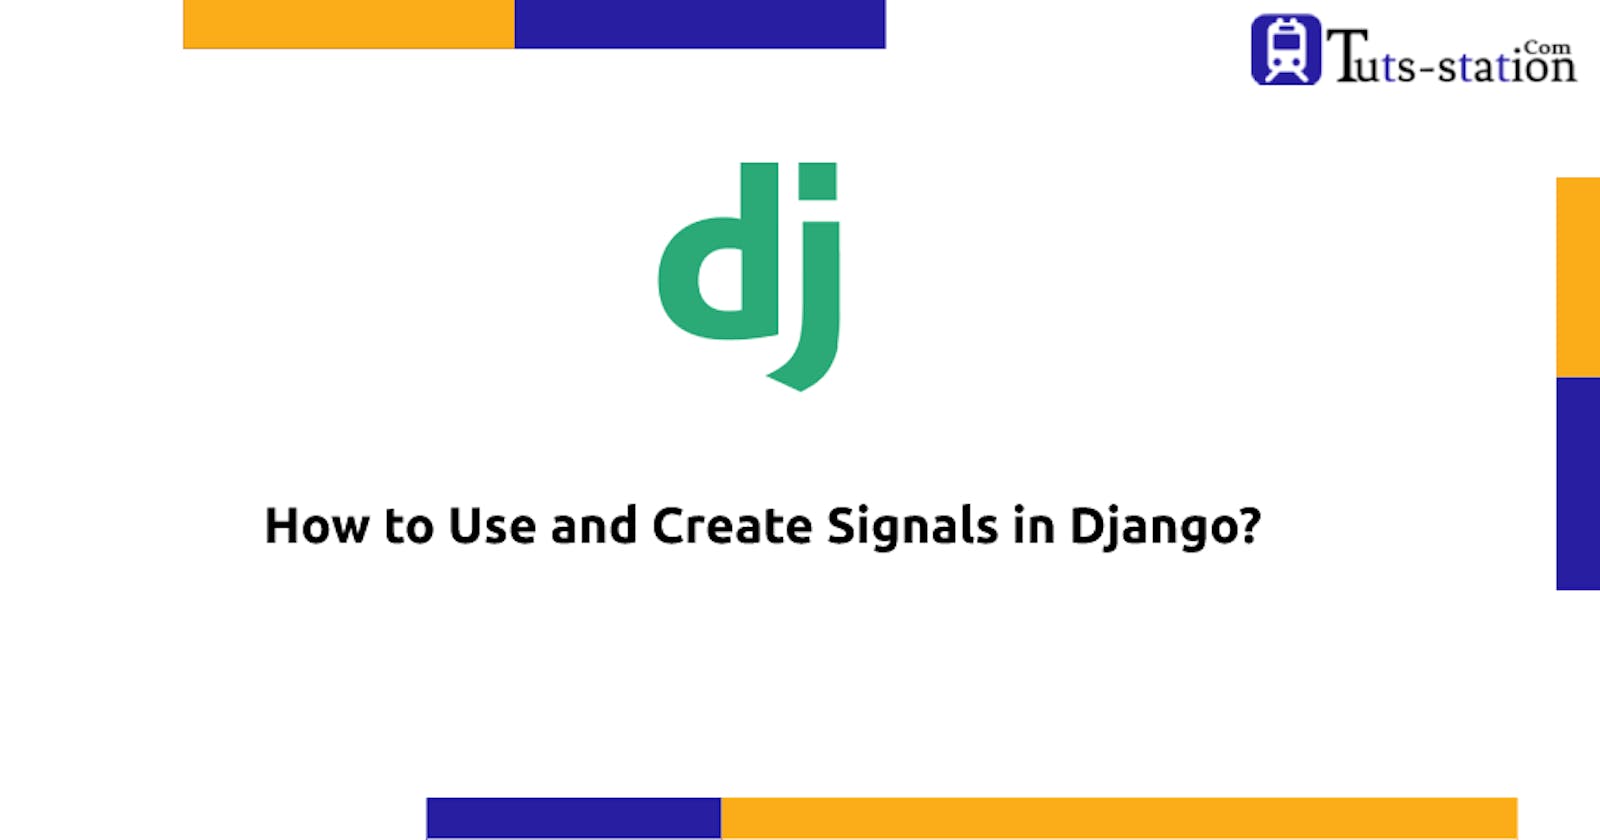 How to Use and Create Signals in Django?